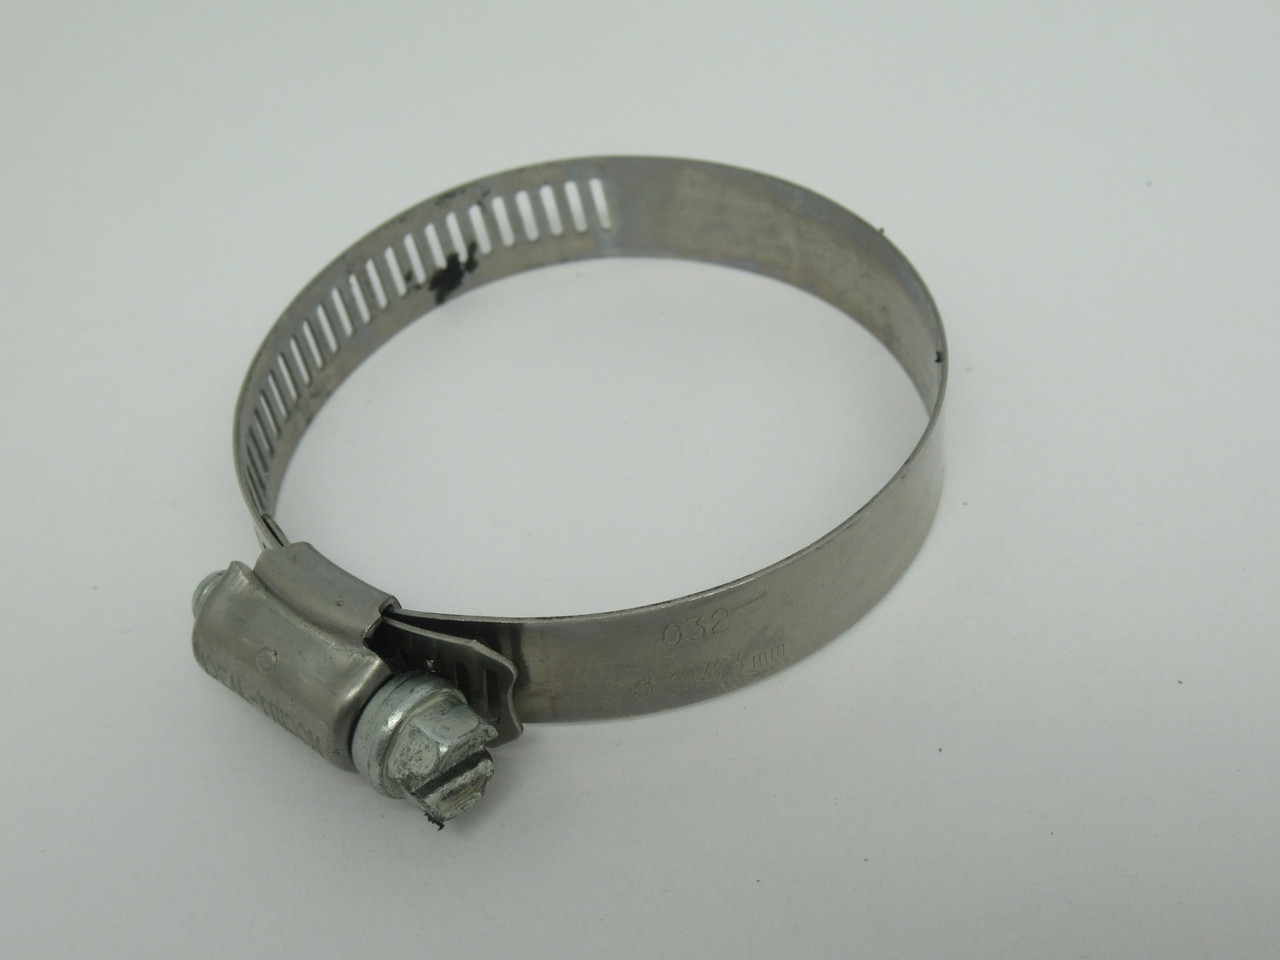 Ideal-Tridon 67004-0032 Stainless Steel Hose Clamp Size 32 USED